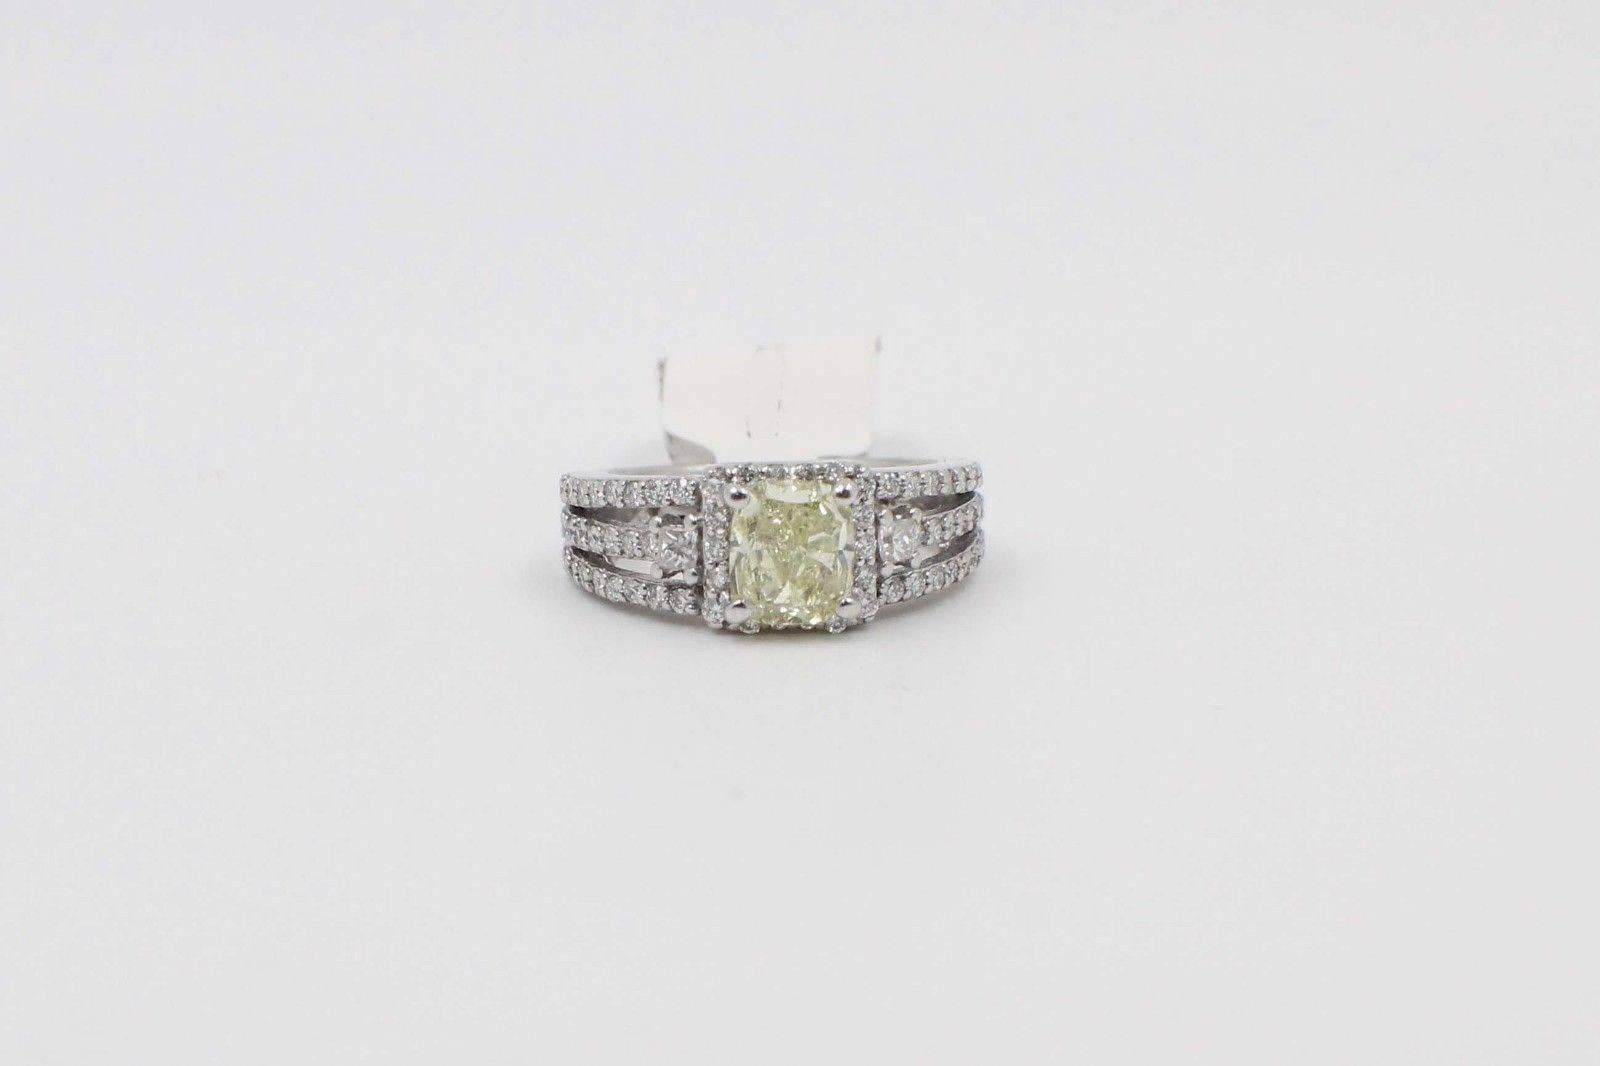 Fancy Yellow Cushion Cut 1.96 Carat Diamond Ring in 14 Karat White Gold GIA In Excellent Condition For Sale In San Diego, CA